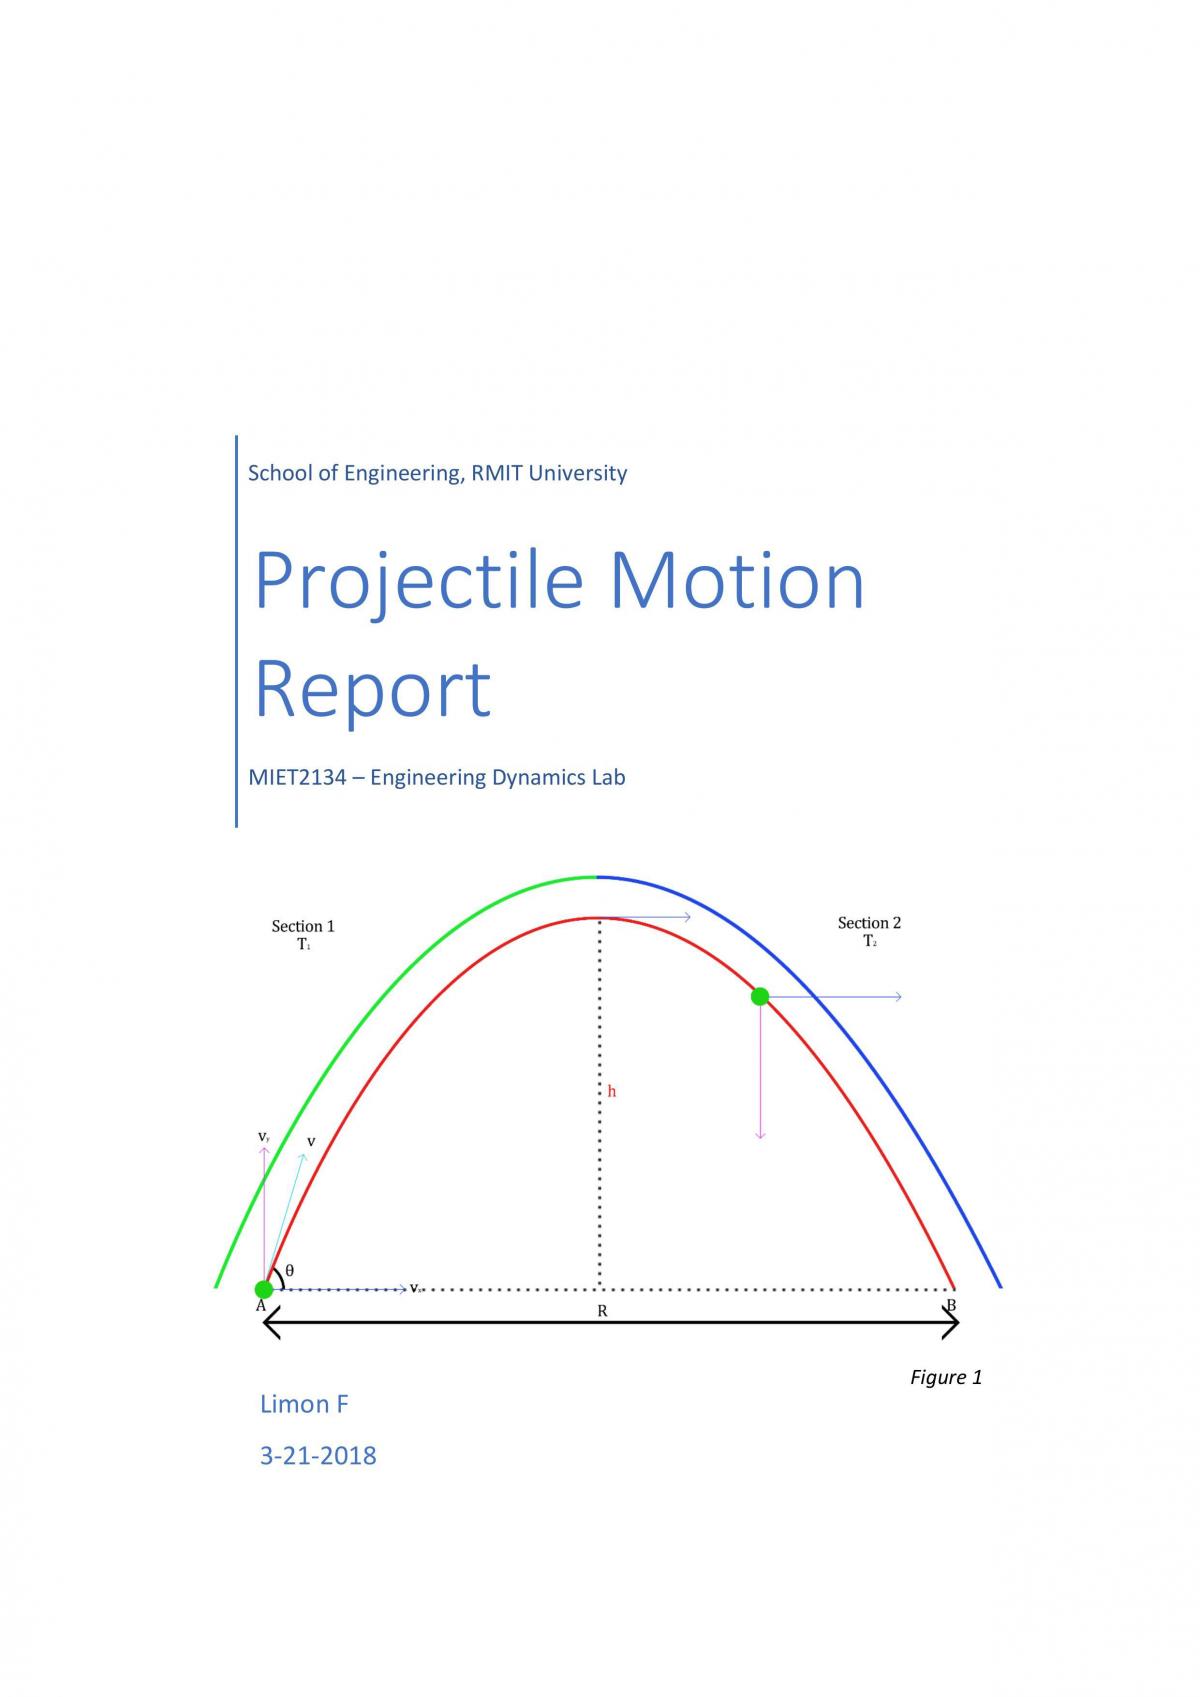 research work on projectile motion